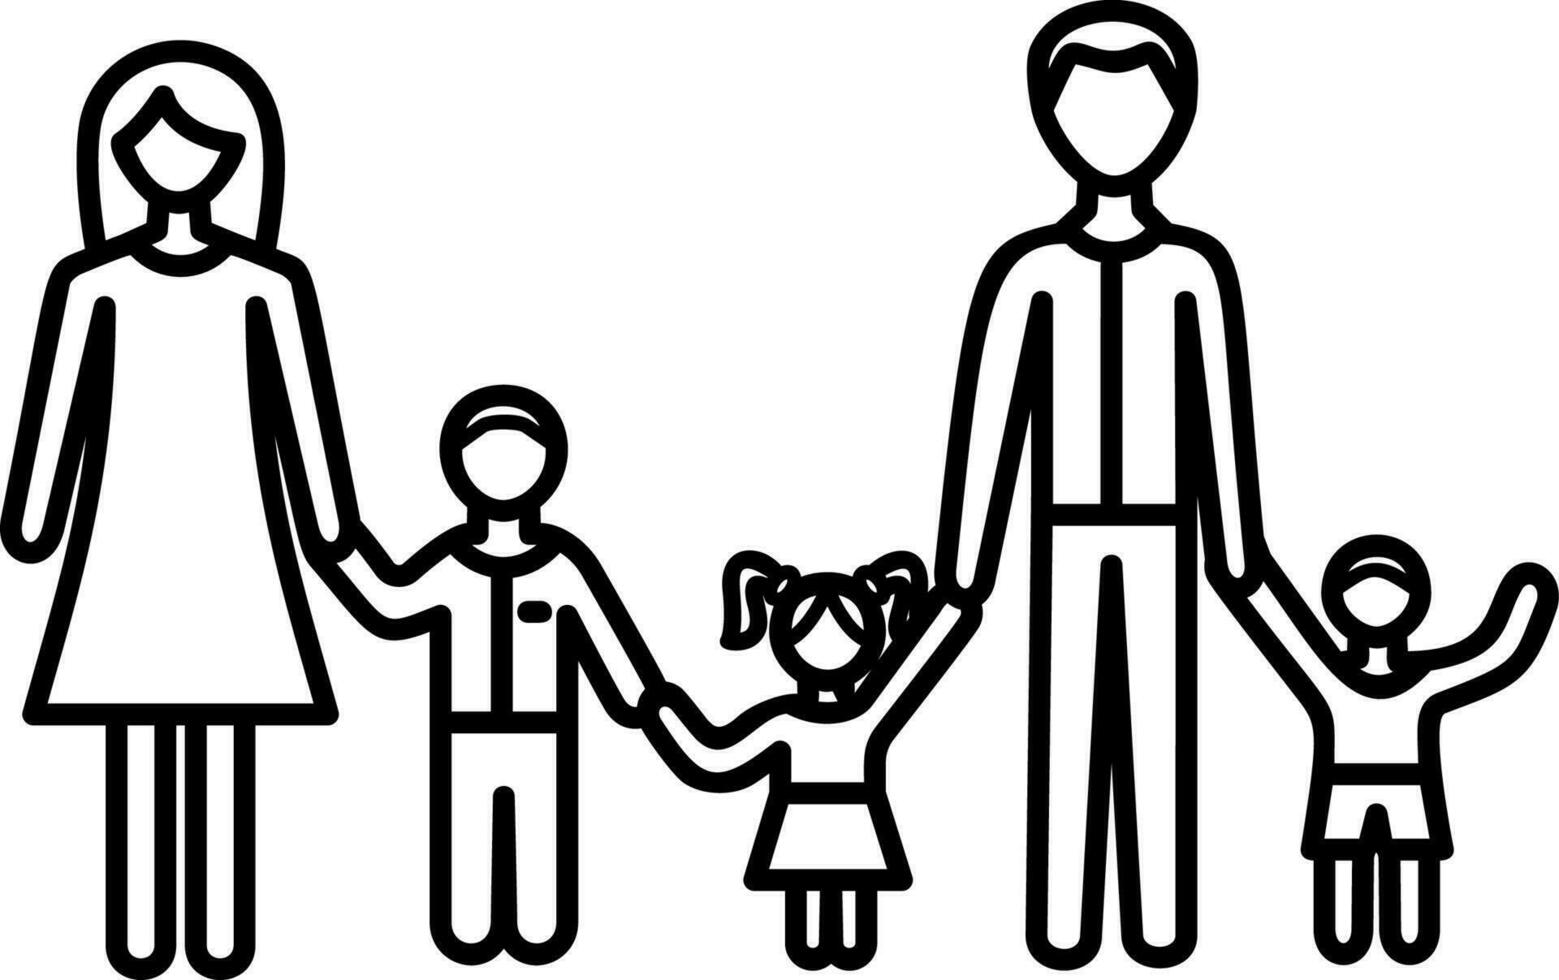 a family icon vector illustration